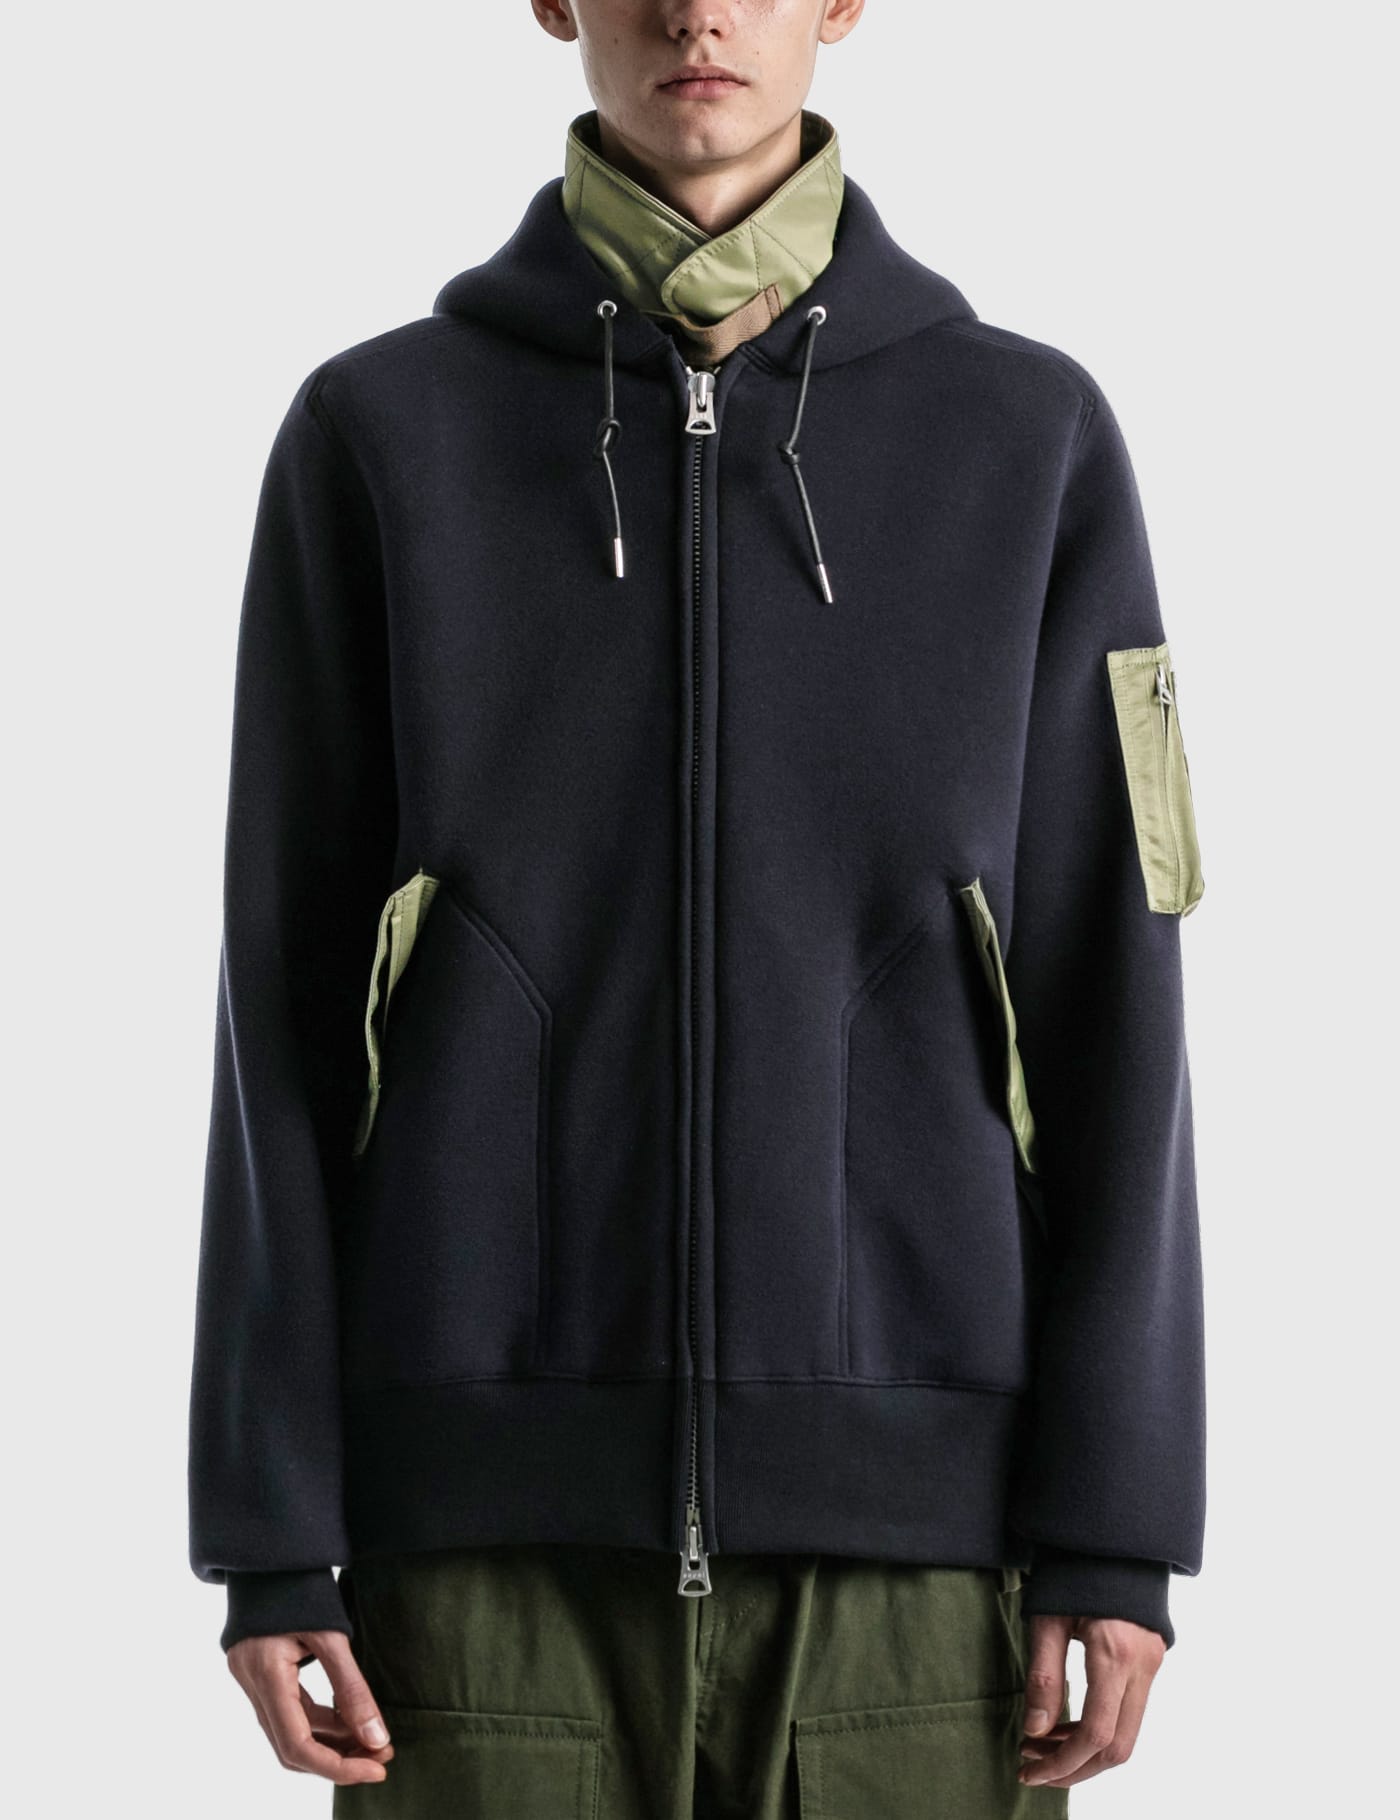 Sacai - Sponge Sweat Hoodie | HBX - Globally Curated Fashion and Lifestyle  by Hypebeast